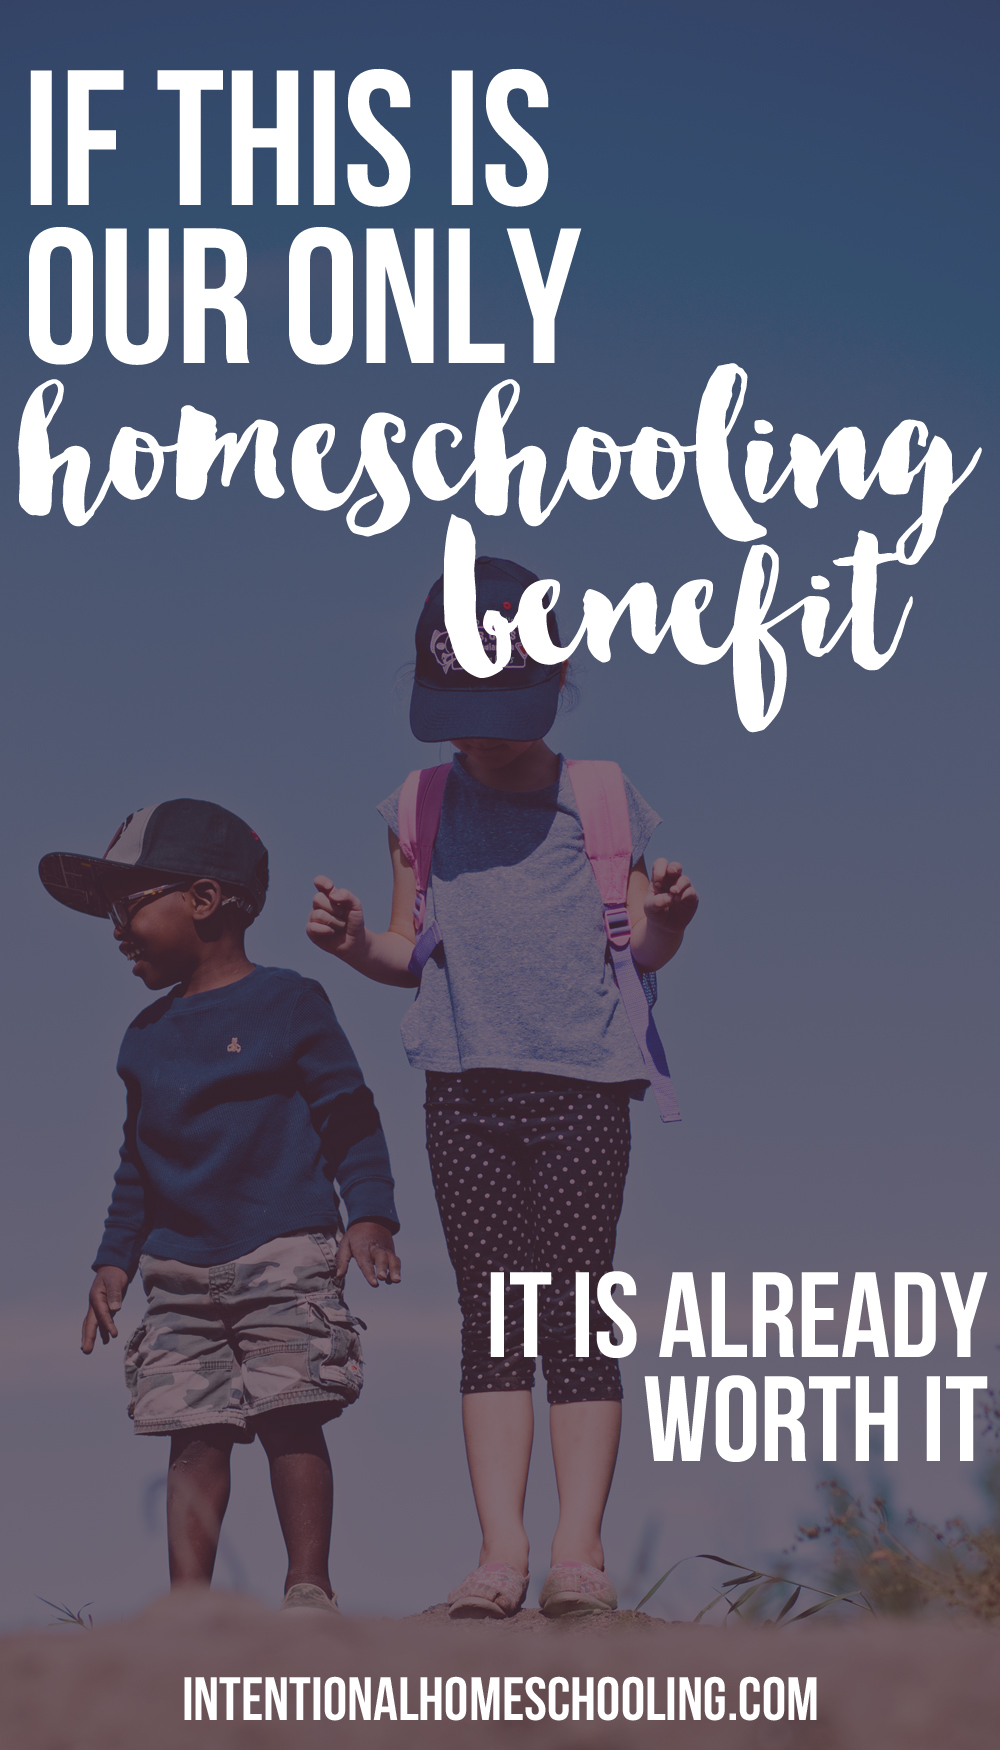 If this is the only benefit we see from homeschooling it is worth it already.